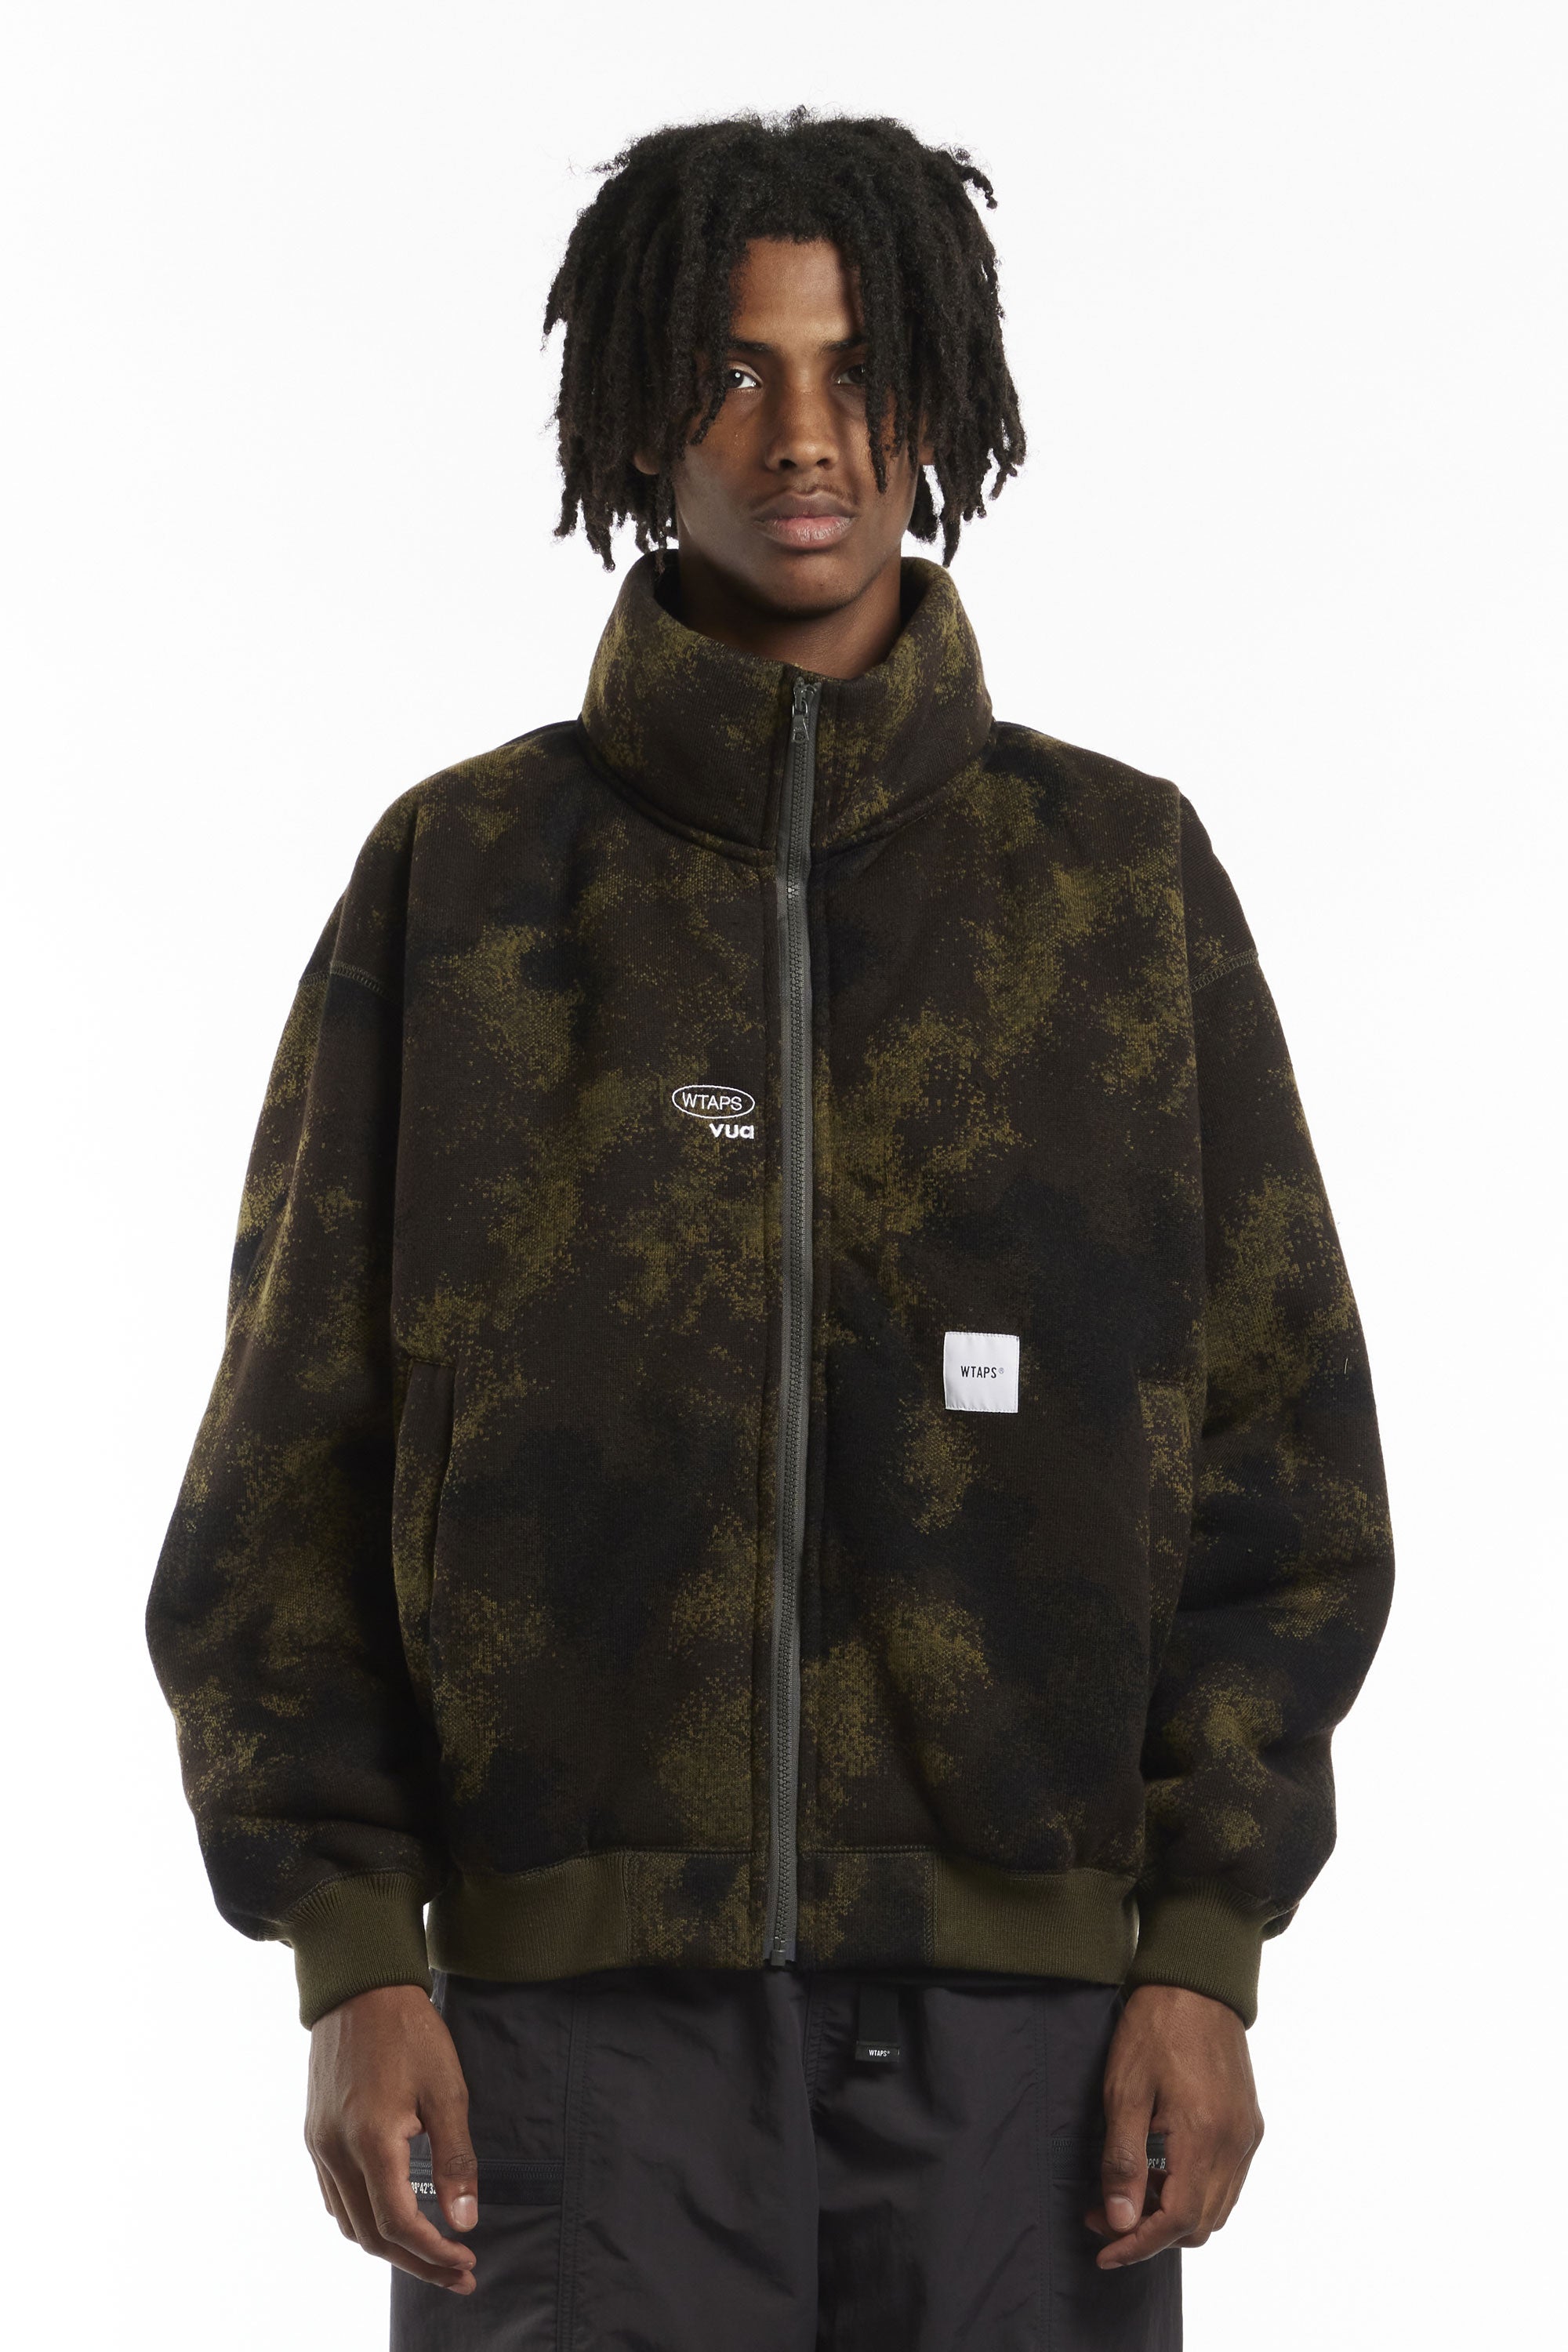 WTAPS - GUTTER JACKET – P.A.M. (Perks And Mini)